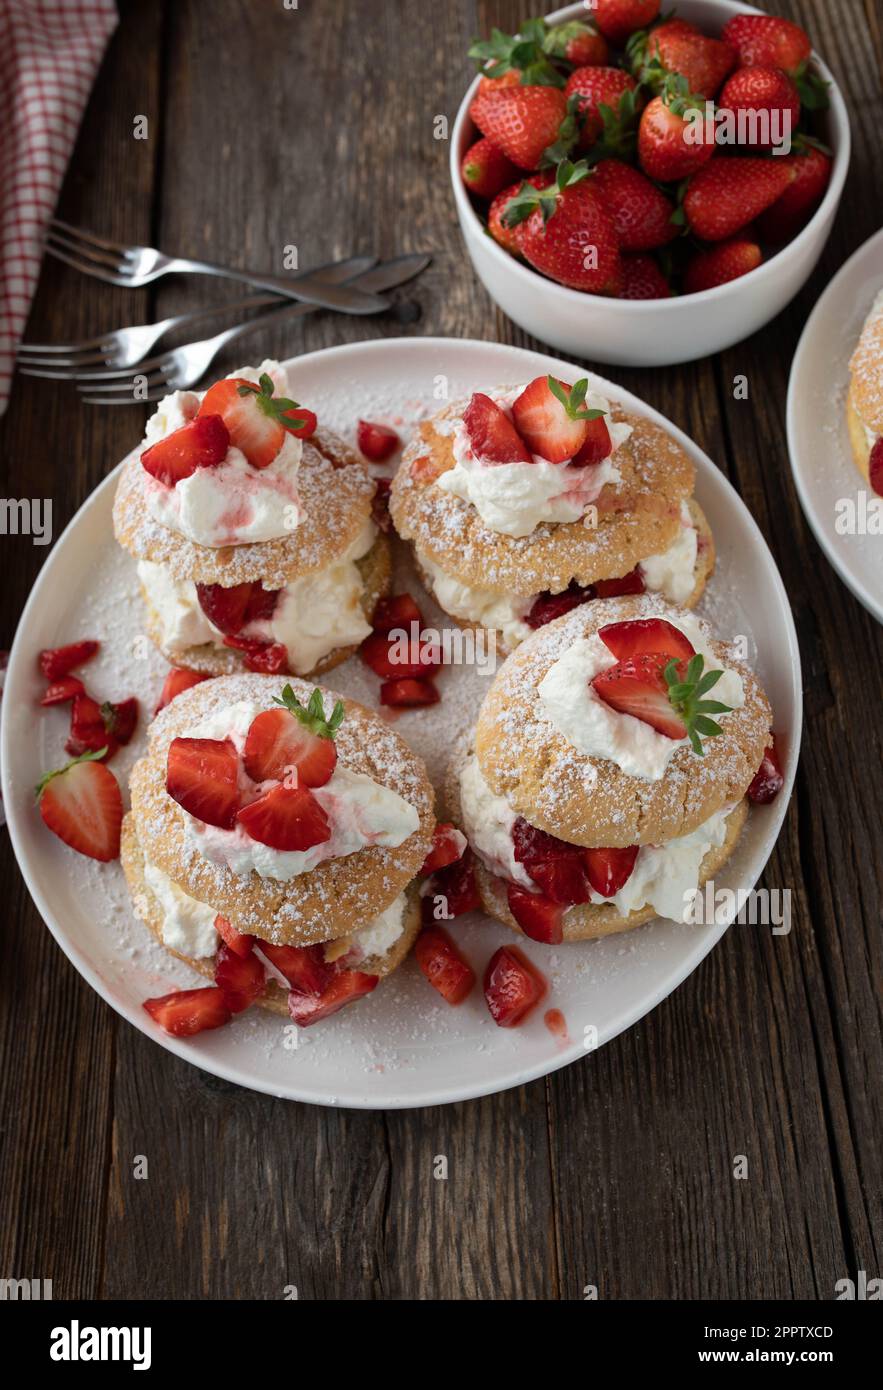 Pastry with strawberries. Traditional strawberry shortcake. Served on wooden table from above. Stock Photo